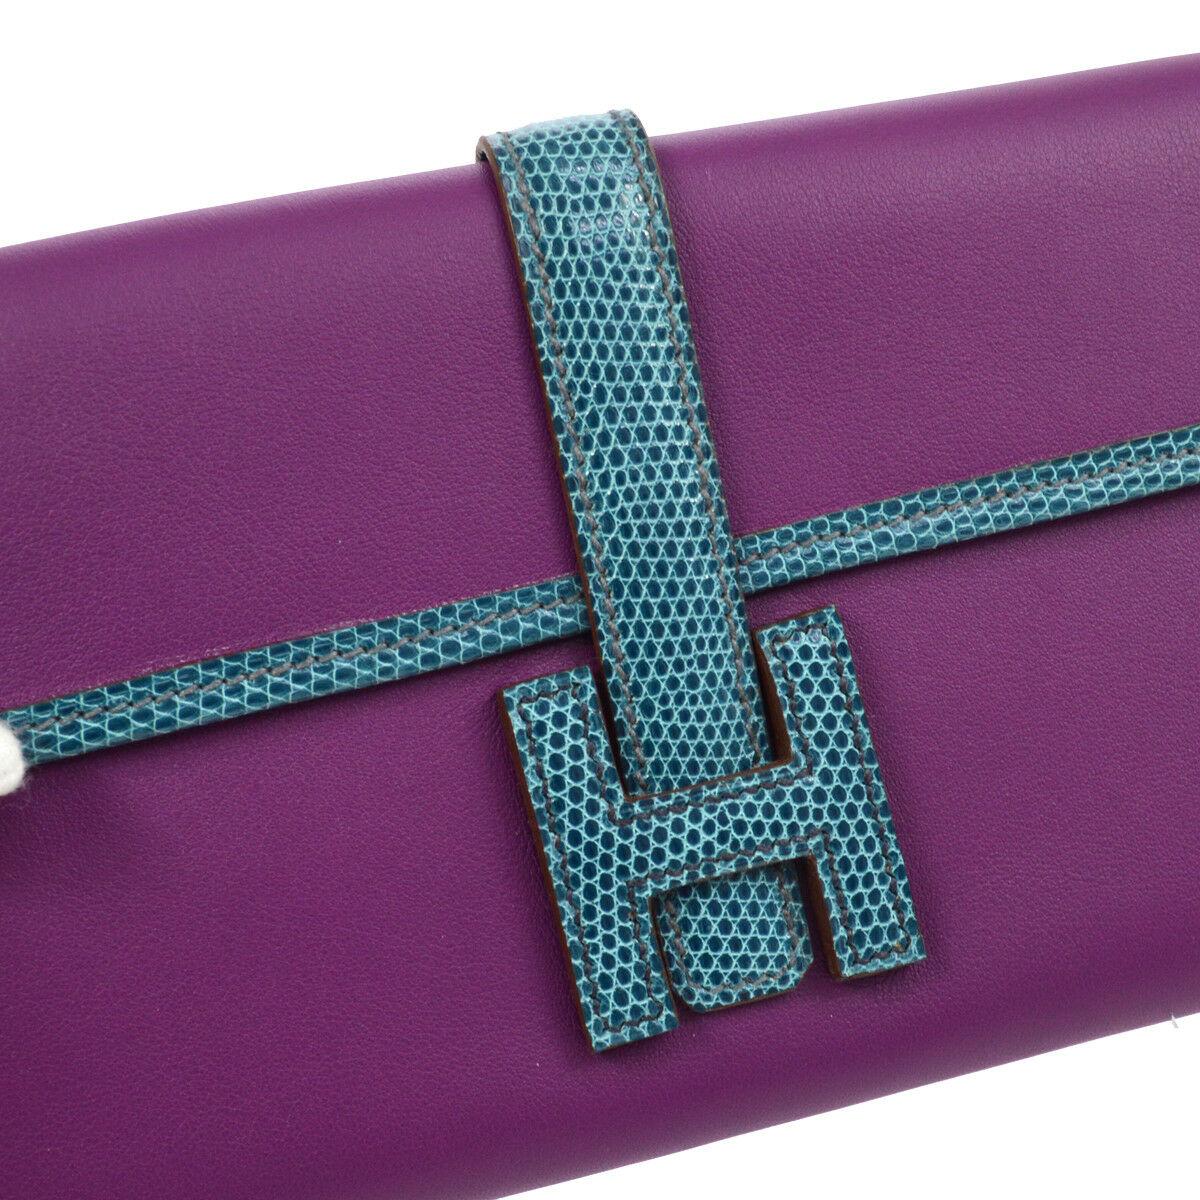 Hermes Blue Purple Lizard Exotic Leather Evening 'H' Logo Jige Wallet Clutch Bag in Box

Leather
Lizard
Leather lining
Fold in buckle closure
Made in France
Measures 8.5